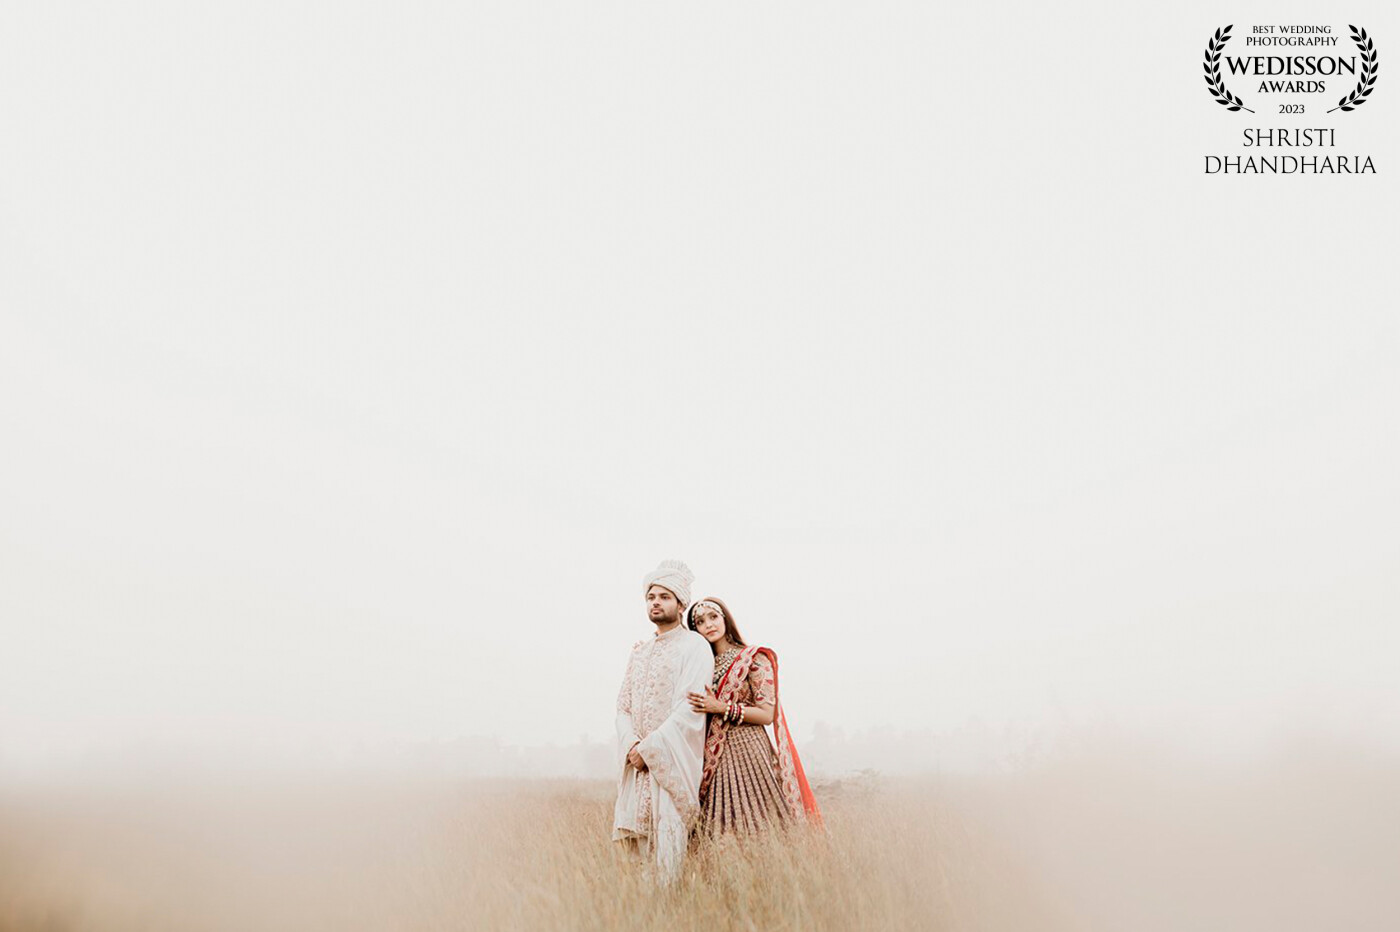 Tanvi and Pratik, a picture of love and happiness on their wedding day. Their outfits are stunning, reflecting their joy for the new journey ahead. Ready to embark on a life filled with love and endless moments together. 💑💍